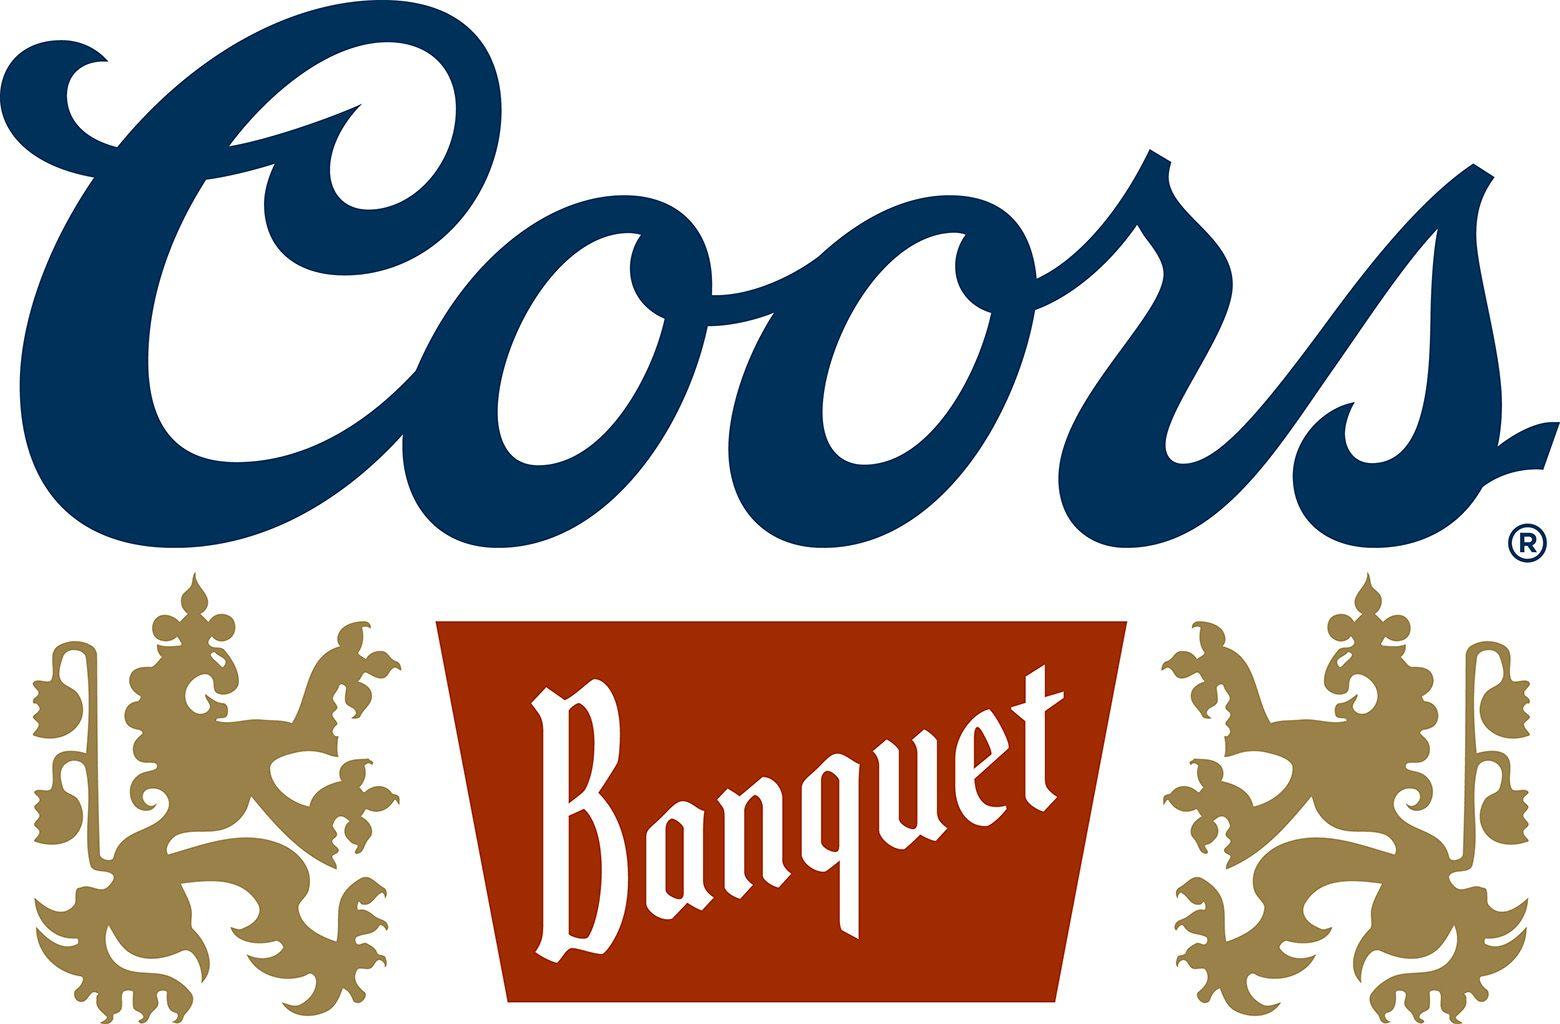 Old Coors Logo - Coors banquet beer Logos